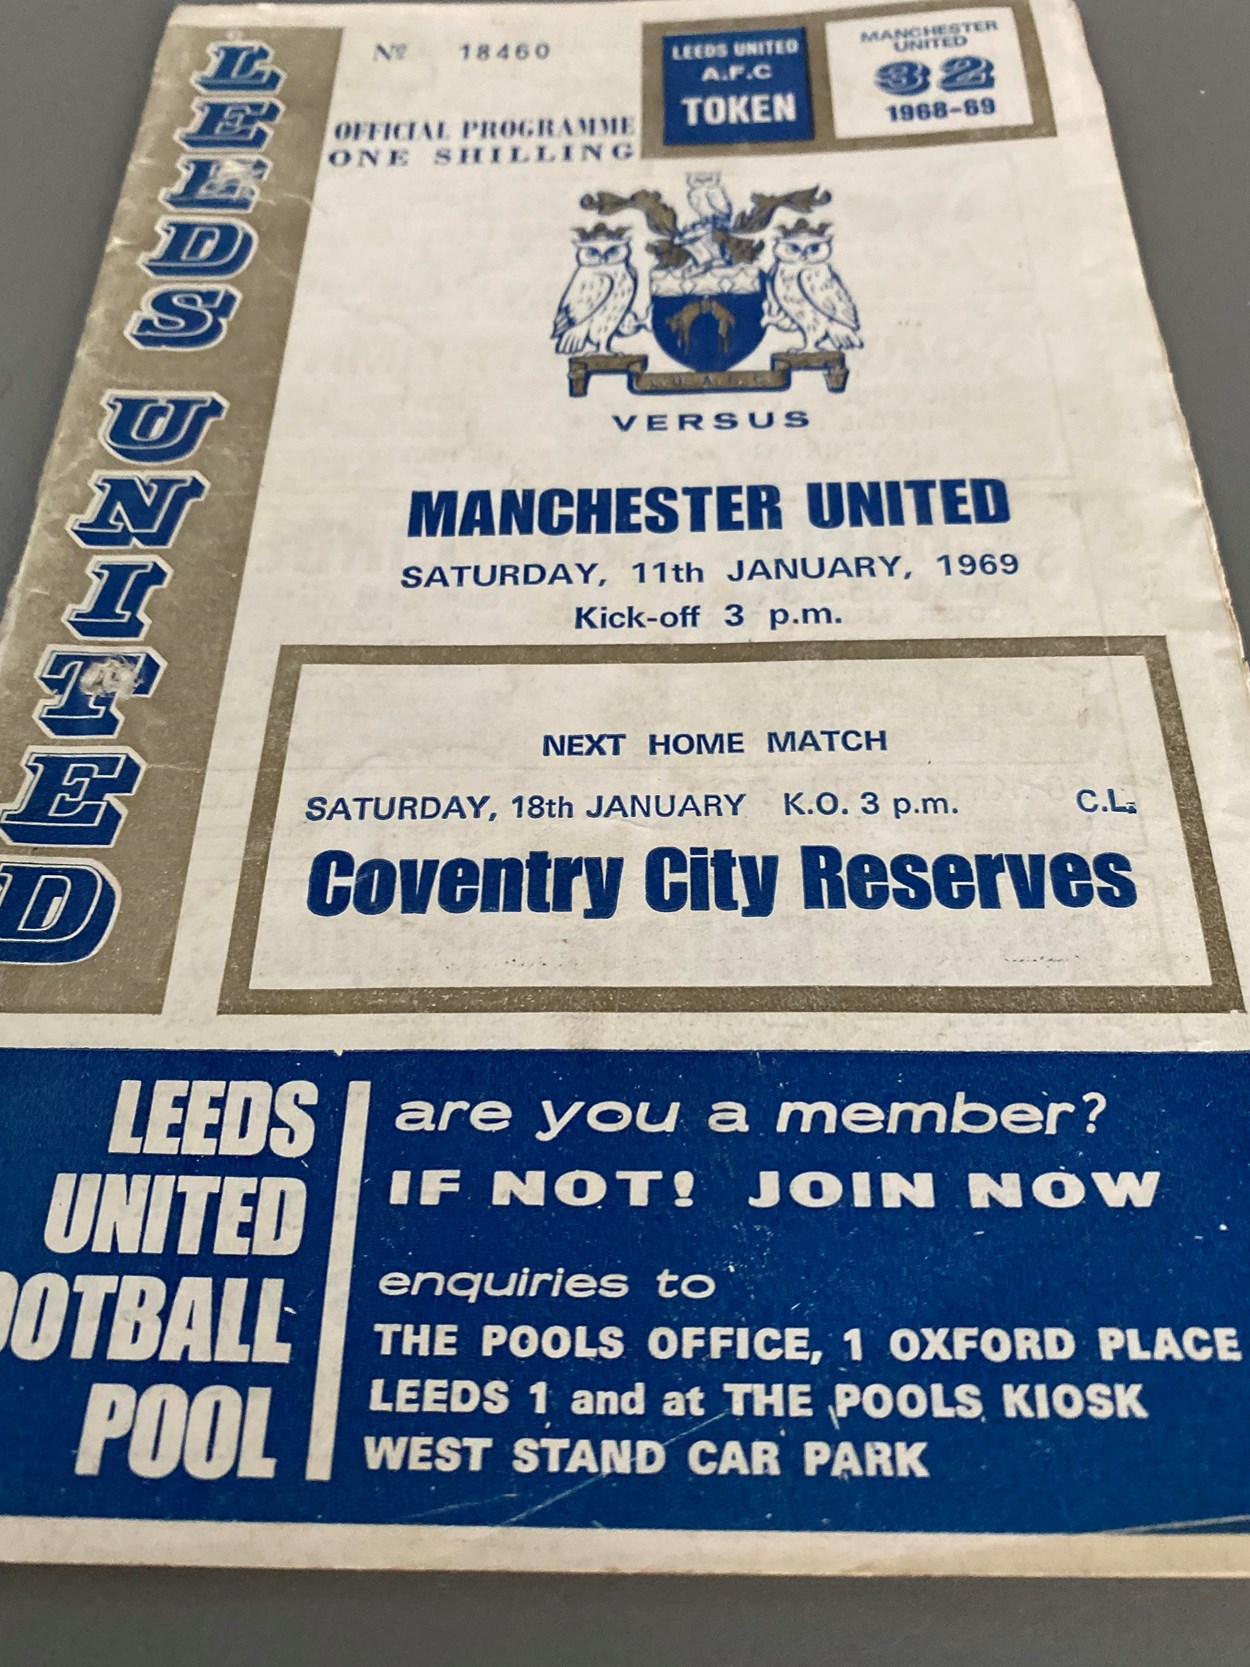 LUFC programme donation: A historic matchday programme from the club’s January 1969 meeting with arch-rivals Manchester United. The season saw Leeds win the First Division title for the first time in the club’s history.